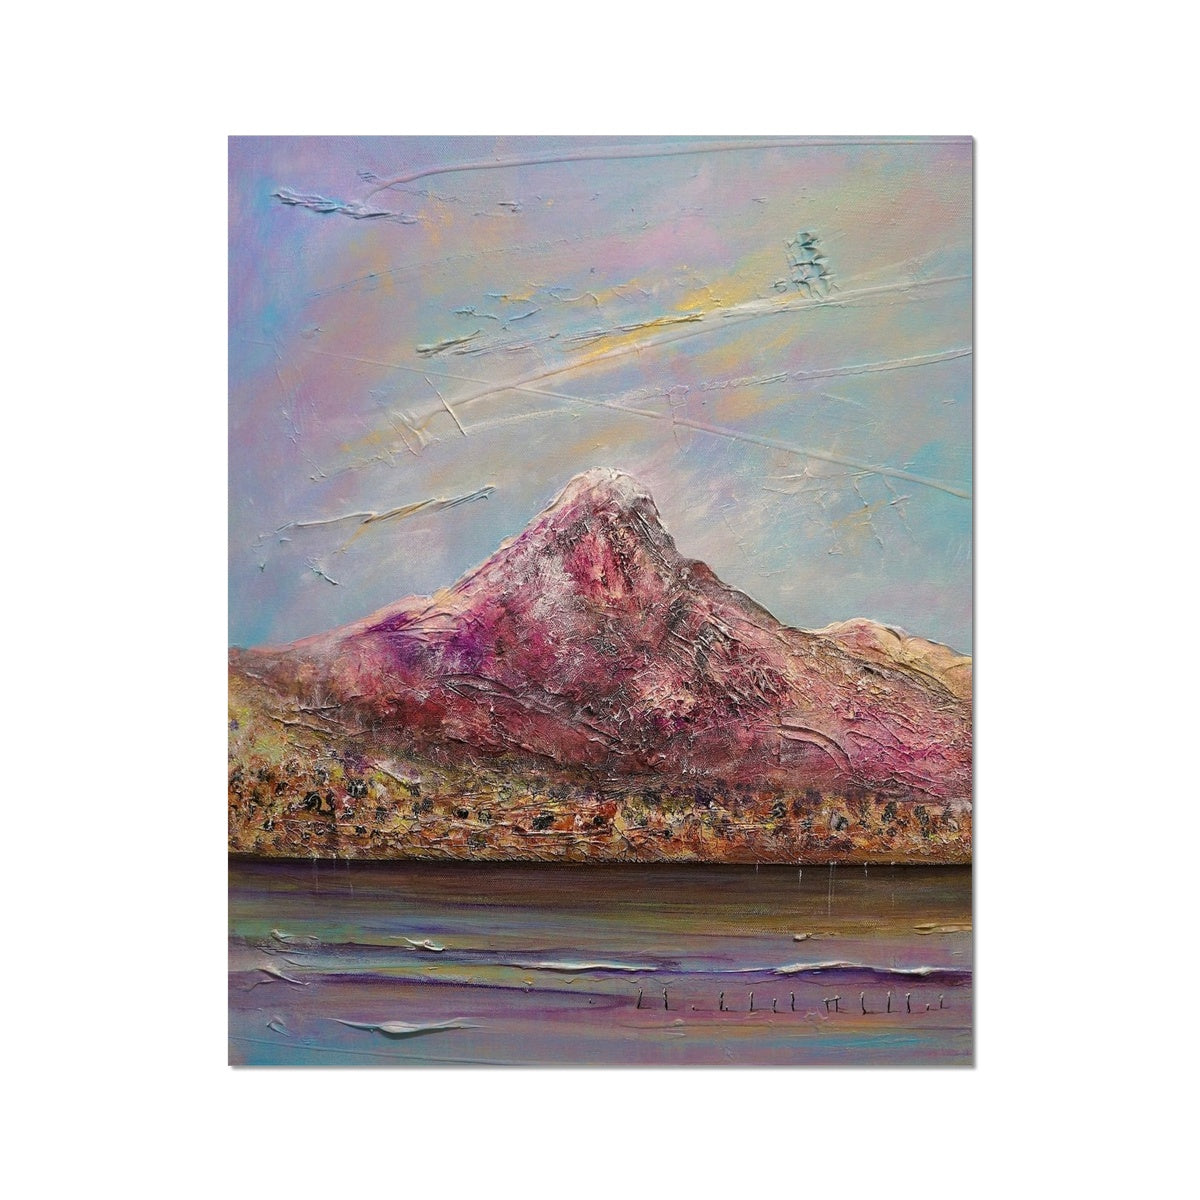 Ben Lomond Painting | Artist Proof Collector Prints From Scotland-Artist Proof Collector Prints-Scottish Lochs & Mountains Art Gallery-16"x20"-Paintings, Prints, Homeware, Art Gifts From Scotland By Scottish Artist Kevin Hunter